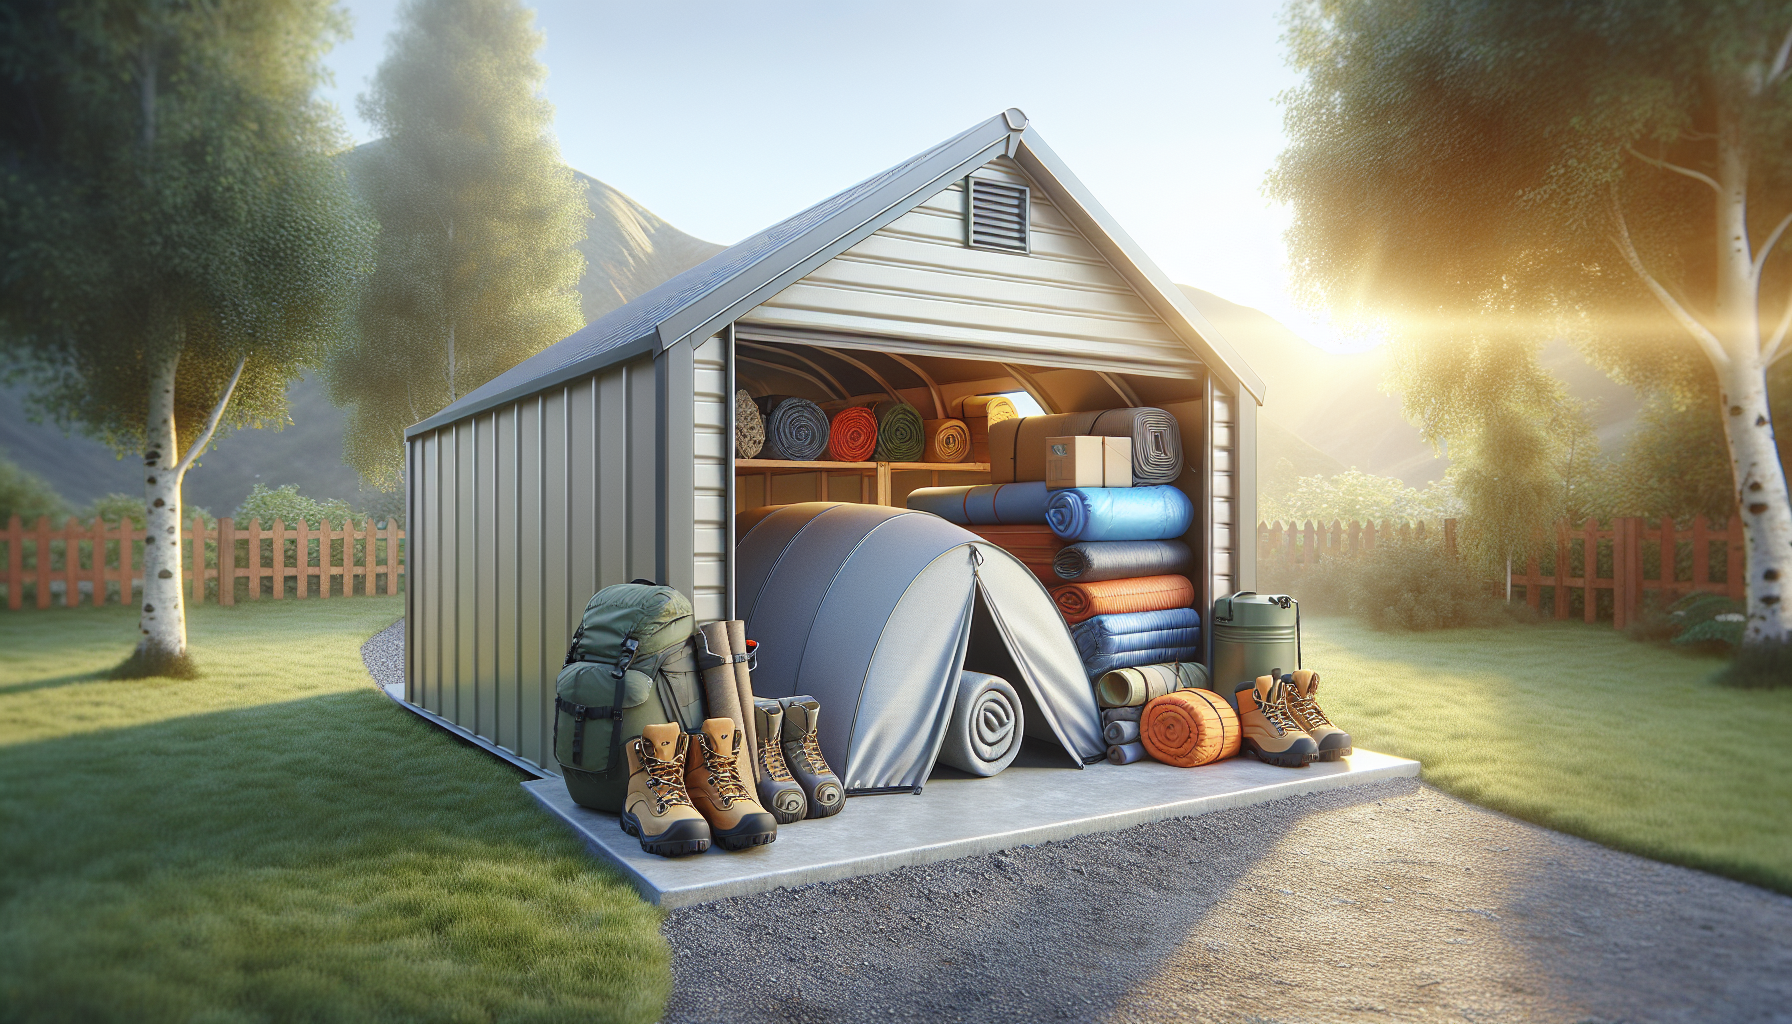 Can I use a portable garage for storing my camping gear?